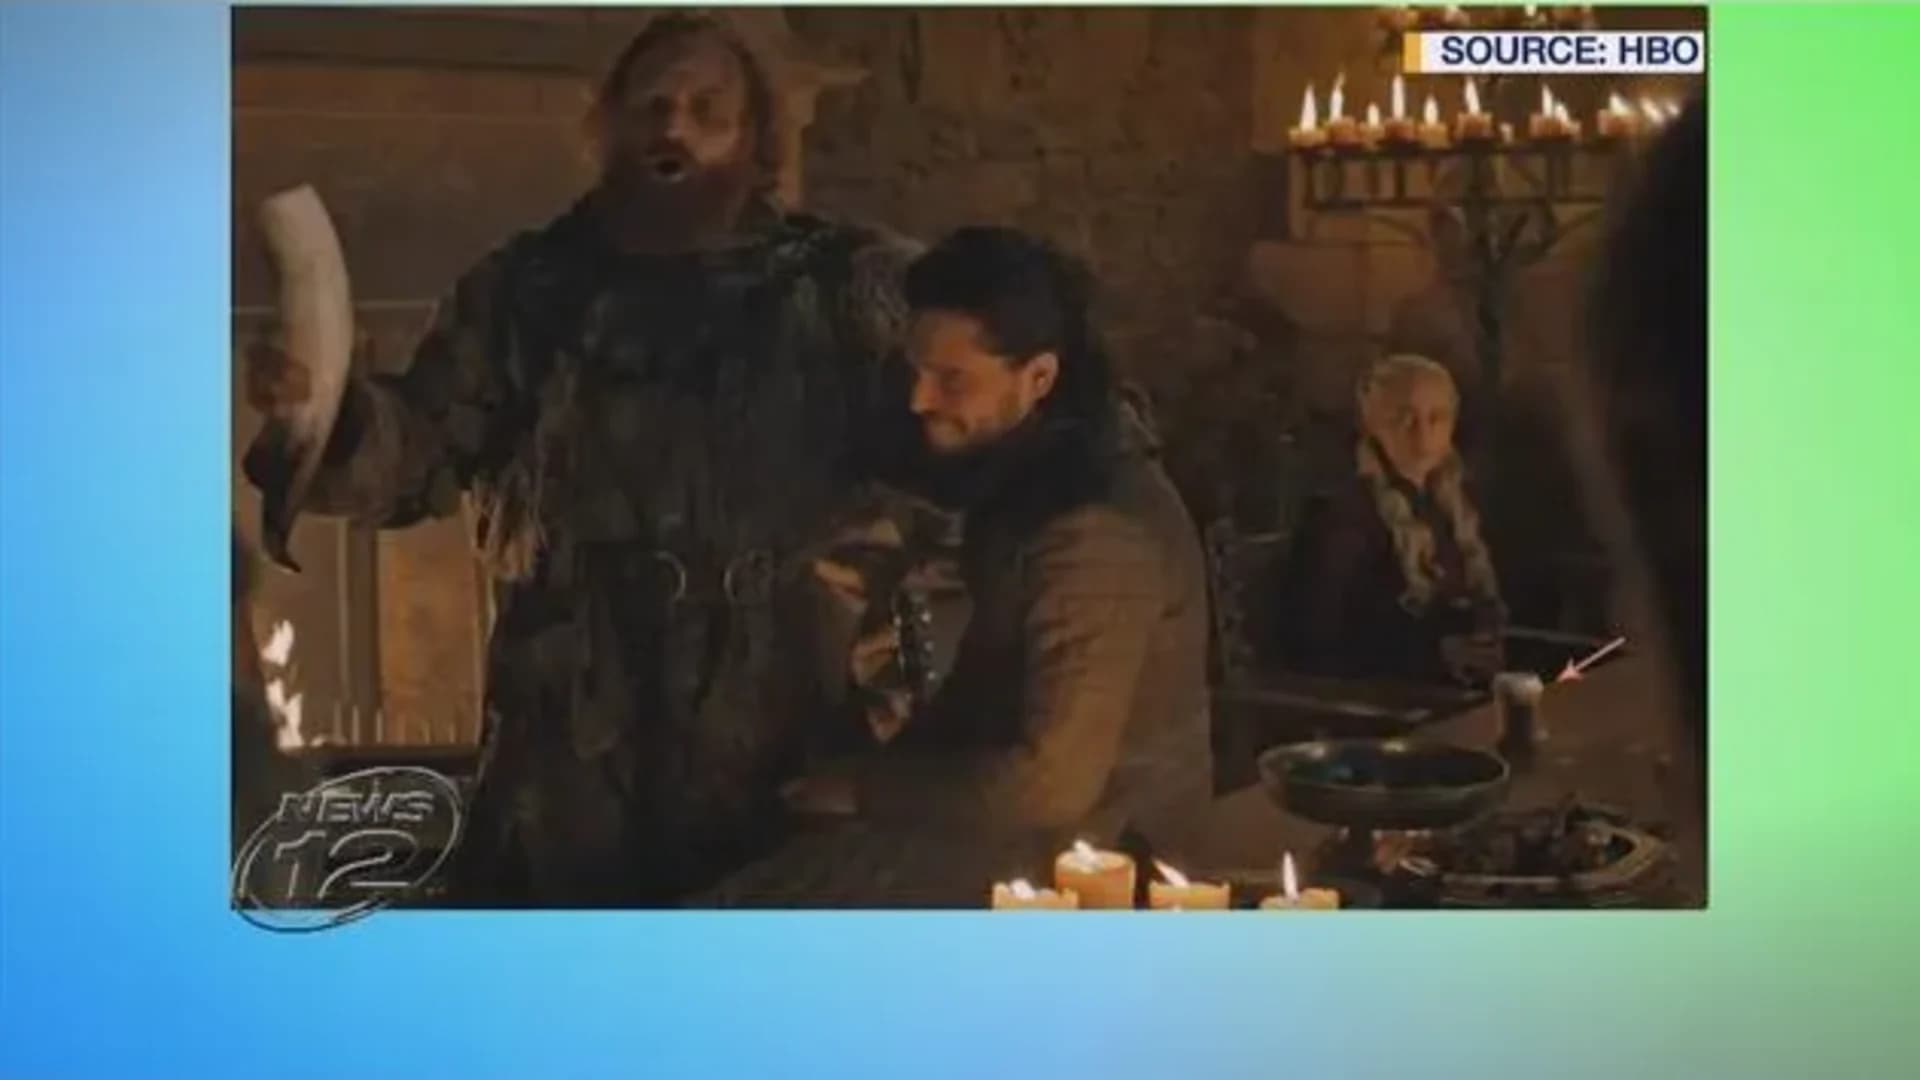 Coffee cup in 'Game of Thrones' scene perks up viewers